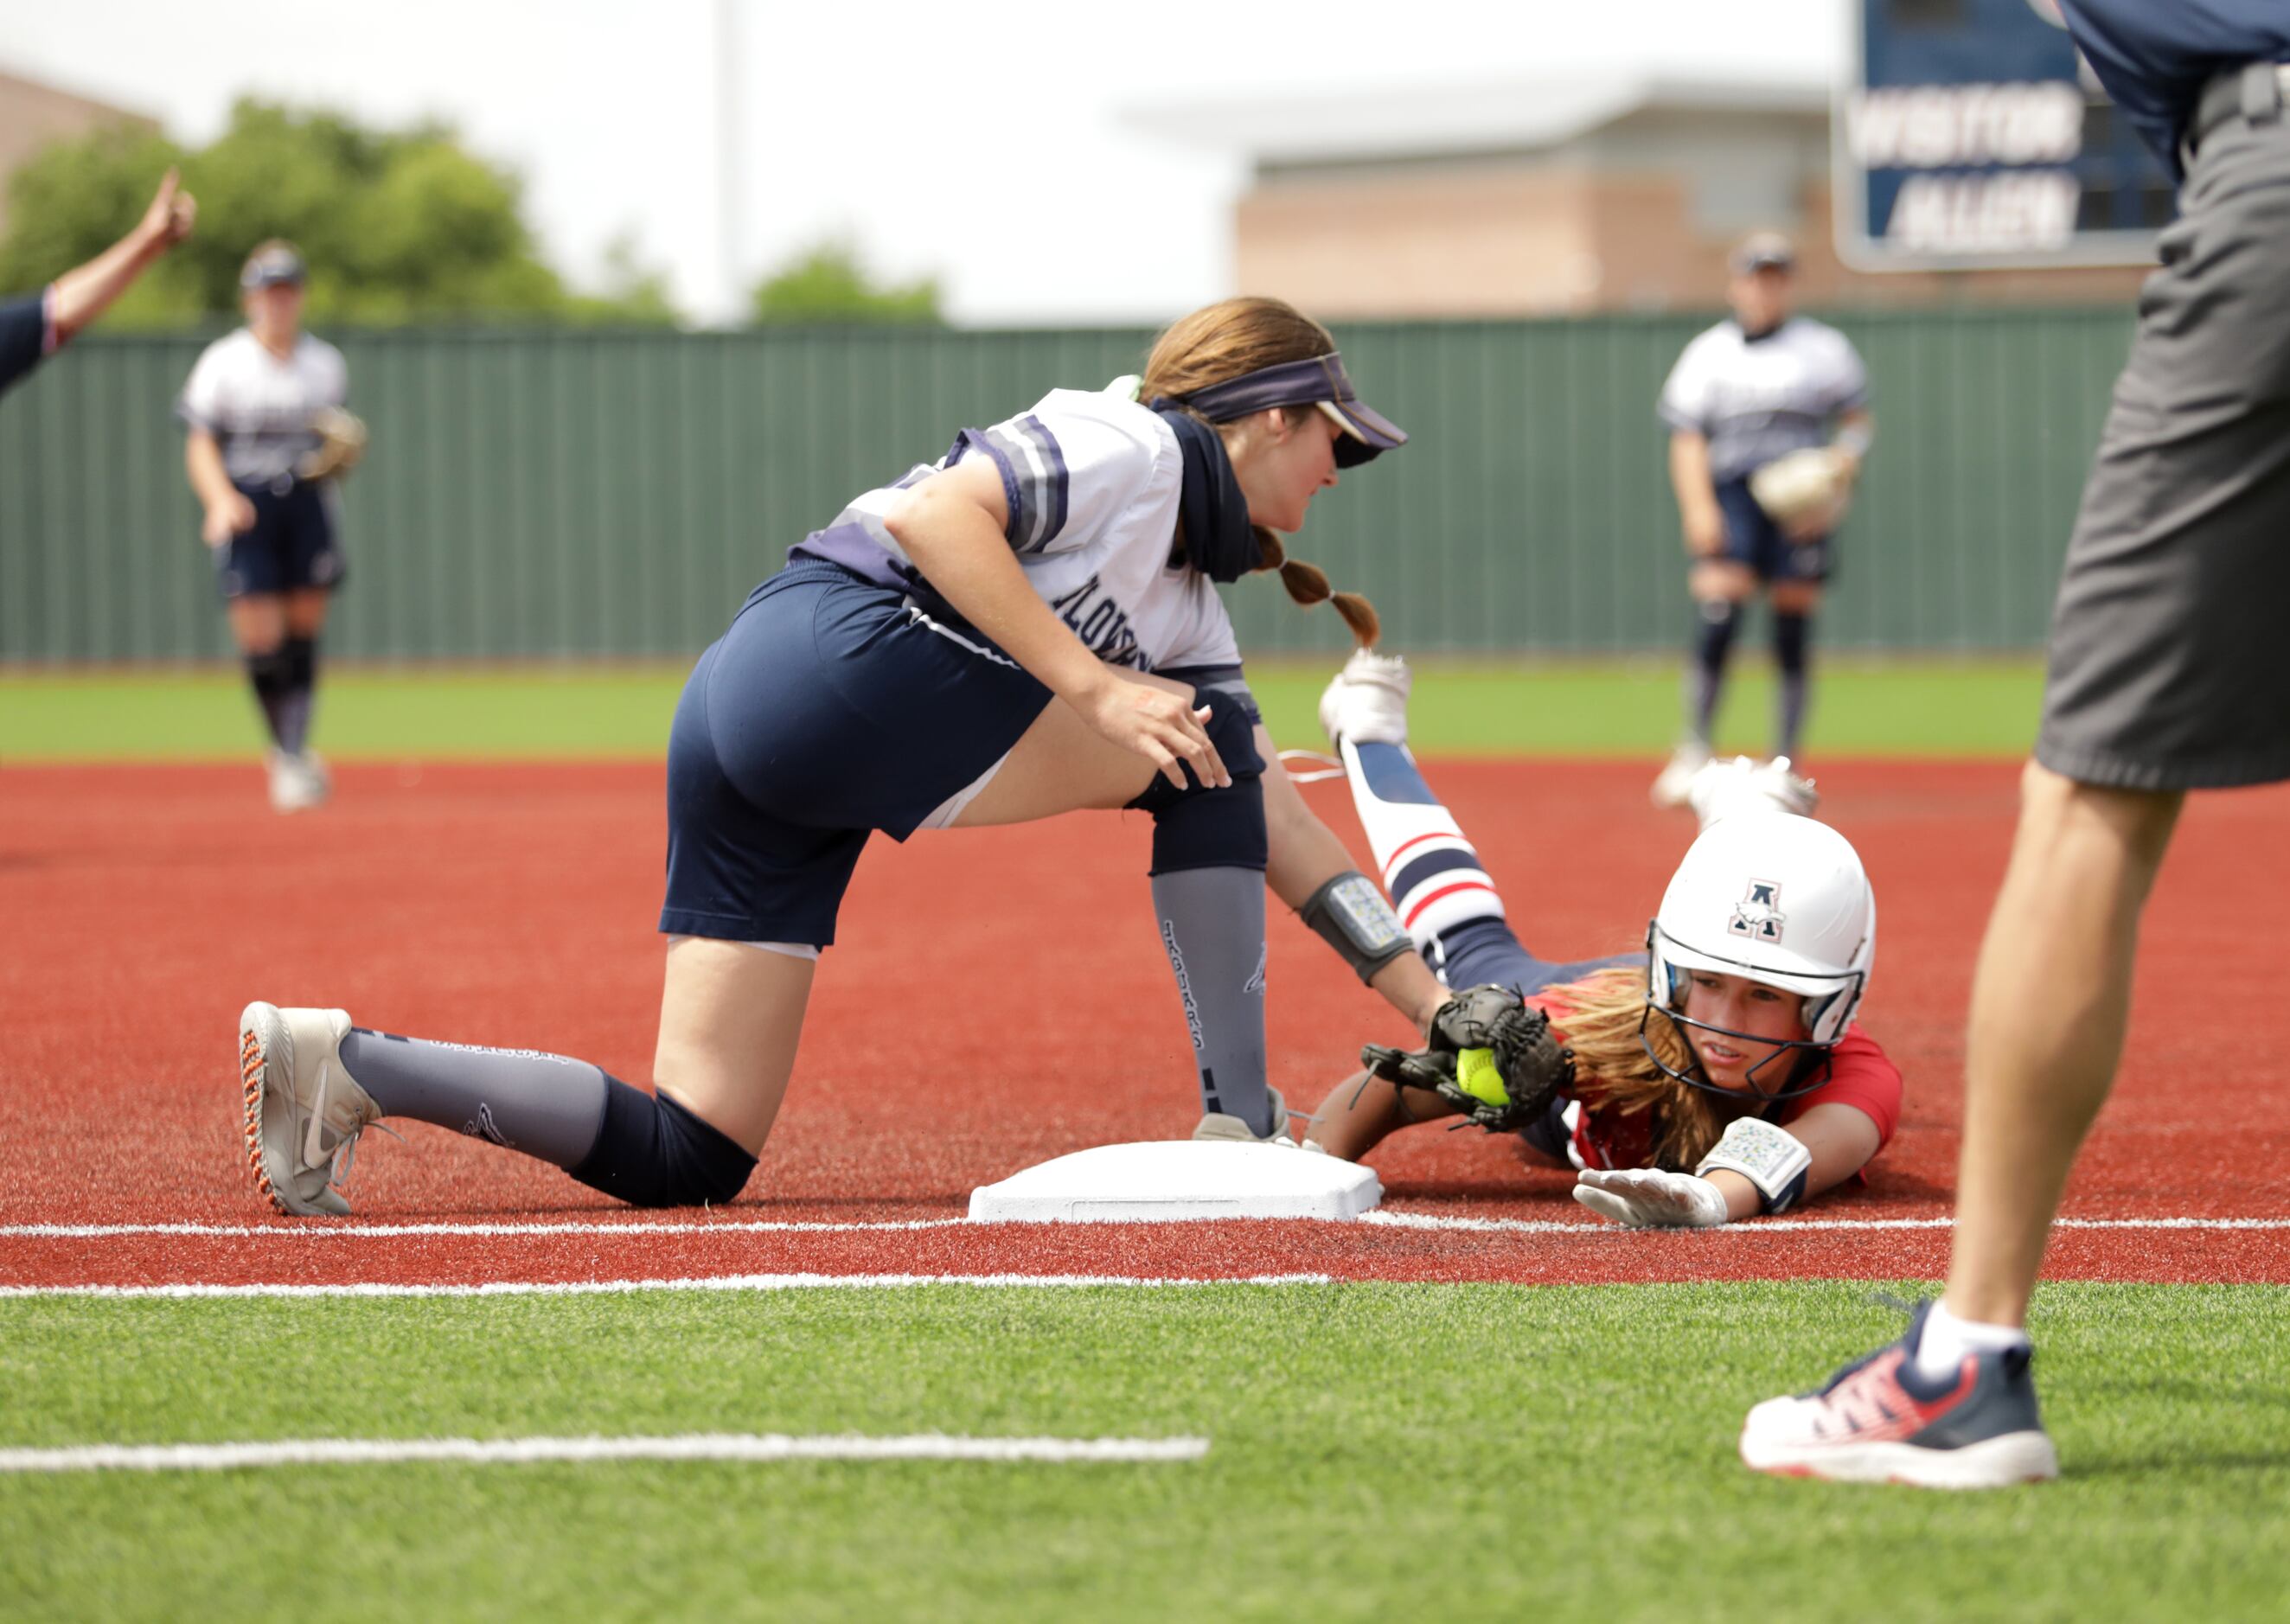 Flower Mound High School player #23, Courtney Cogbill, attempts to tag out Allen High School...